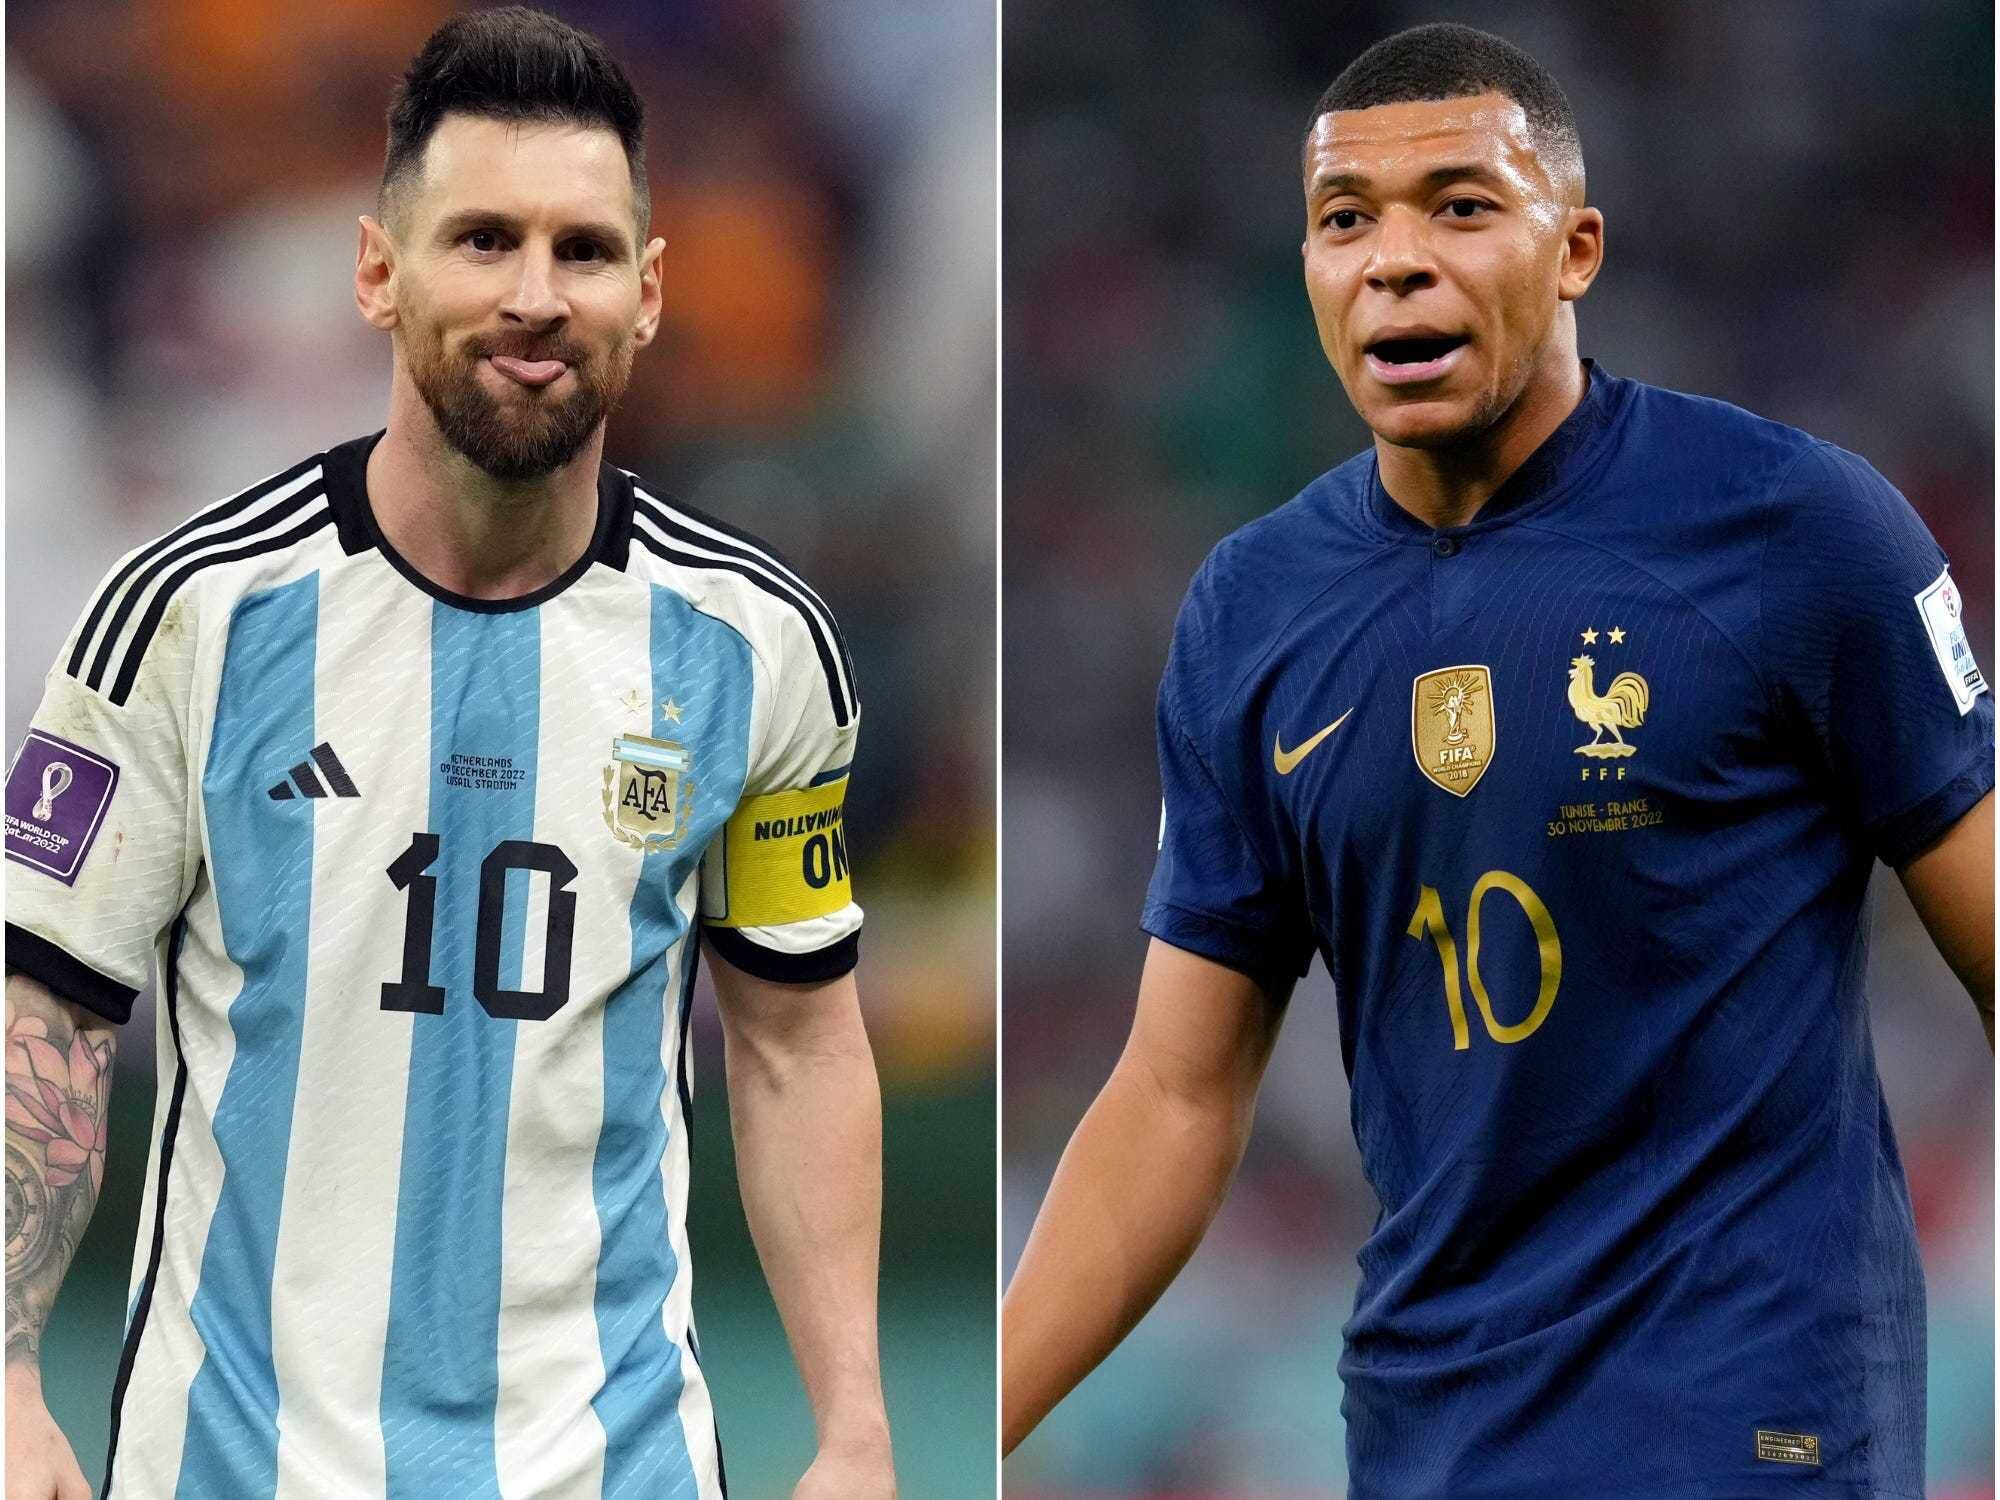 Messi and Mbappe going head-to-head in World Cup final – the PSG stars compared